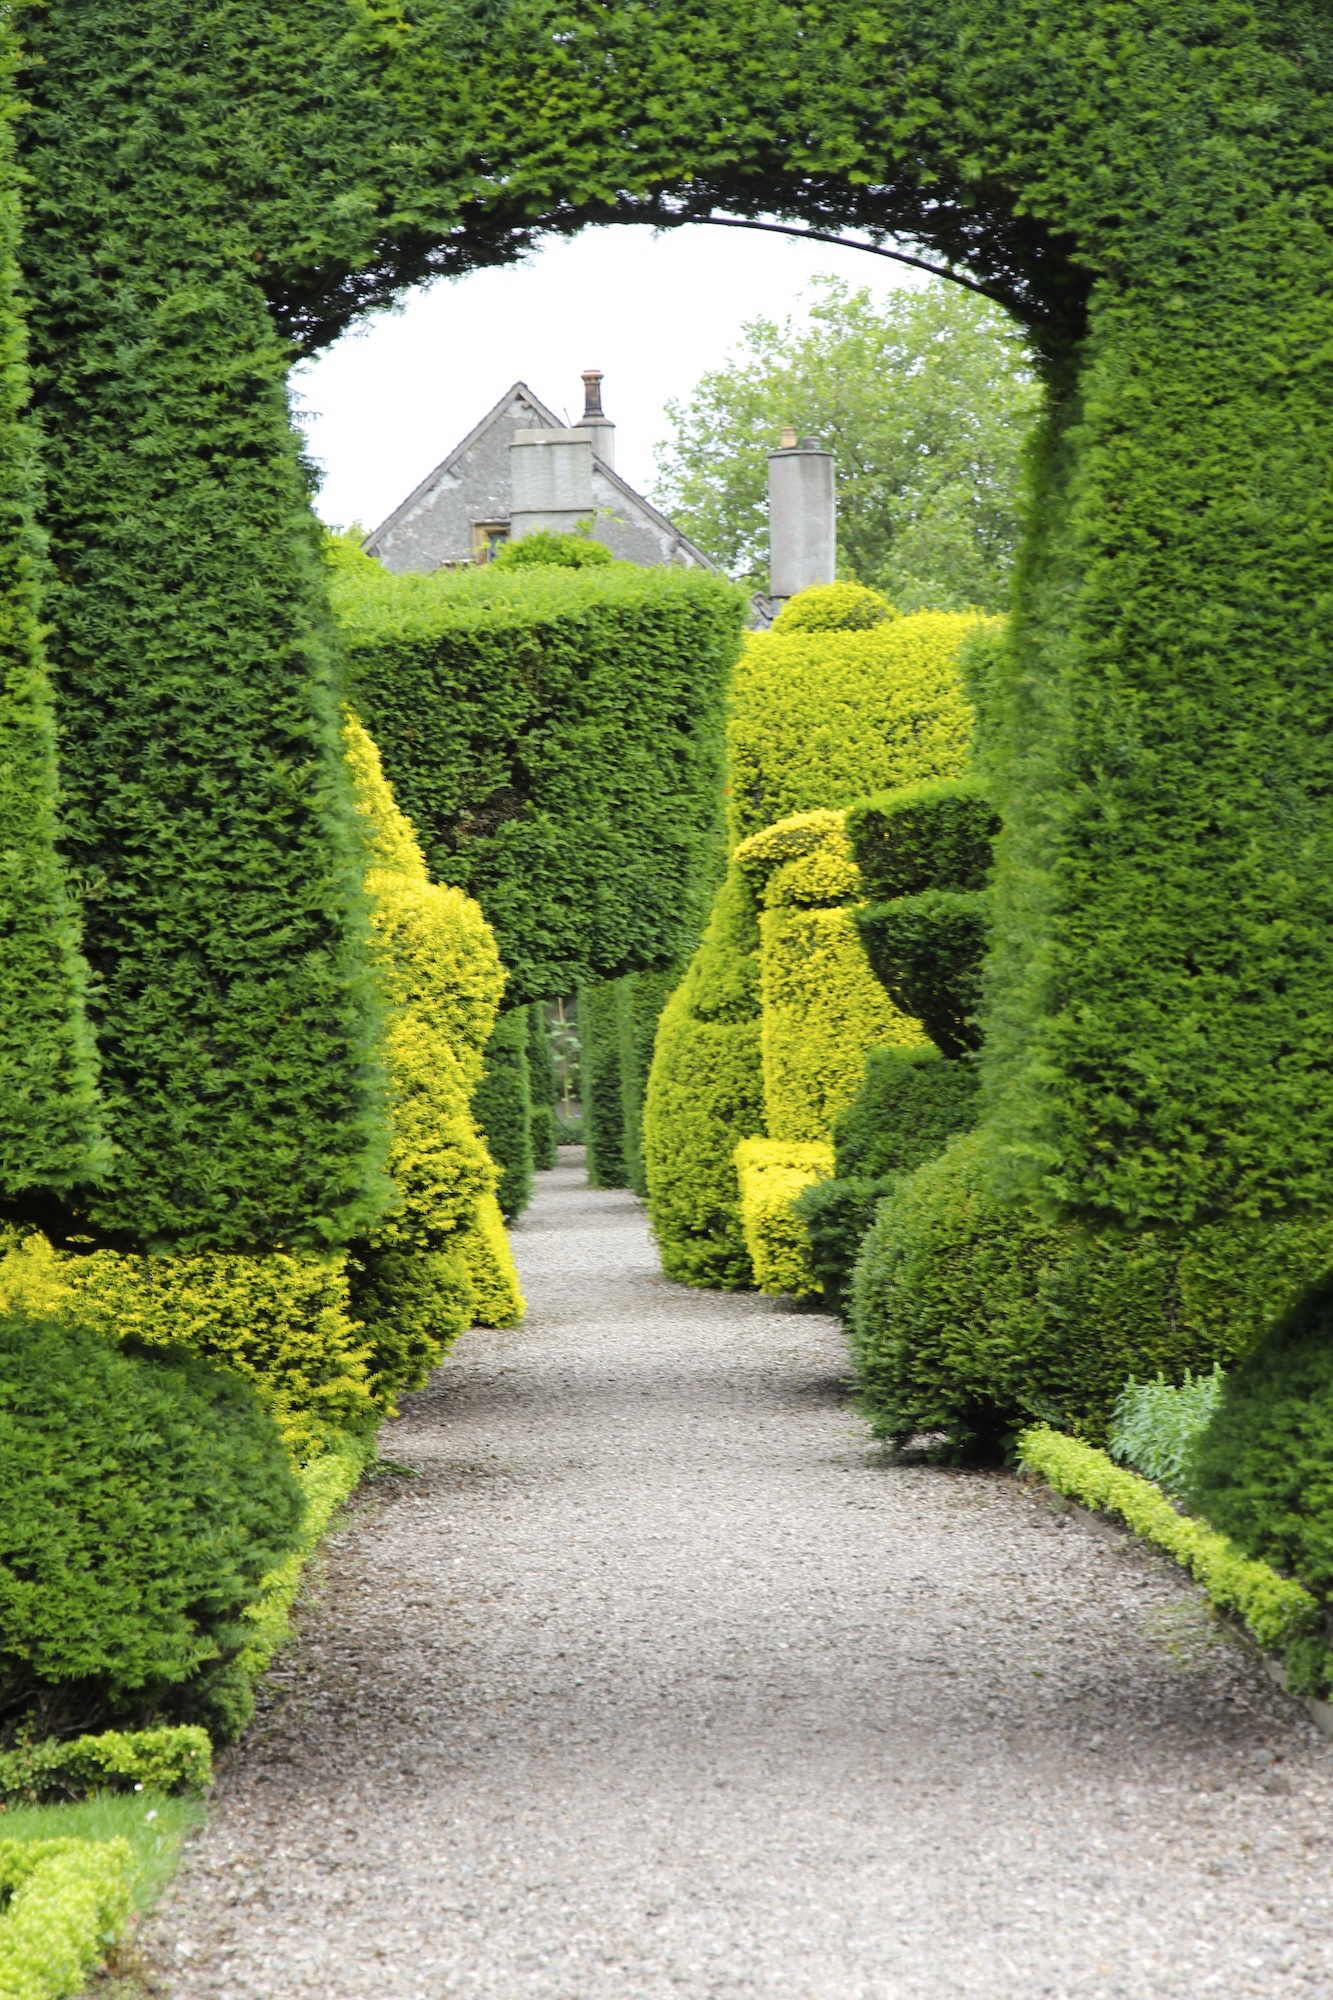 Topiary garden in green shades